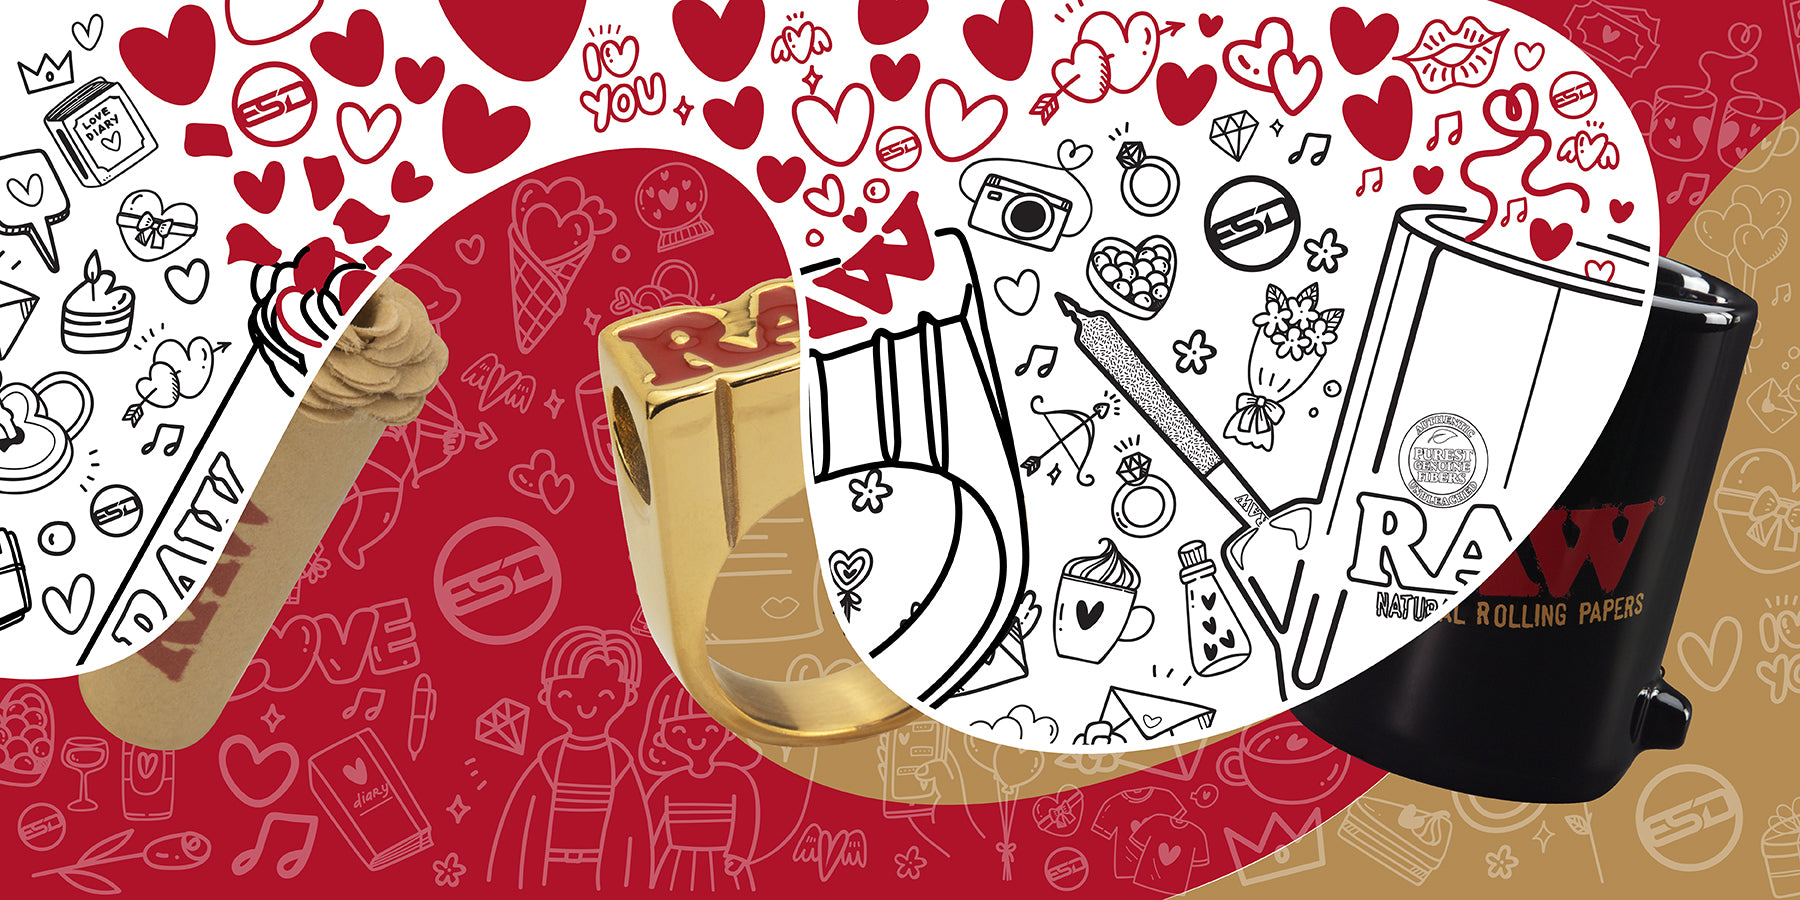 Valentines' Day Smoker's Gift Guide: Top 10 Products for a Romantic Night In